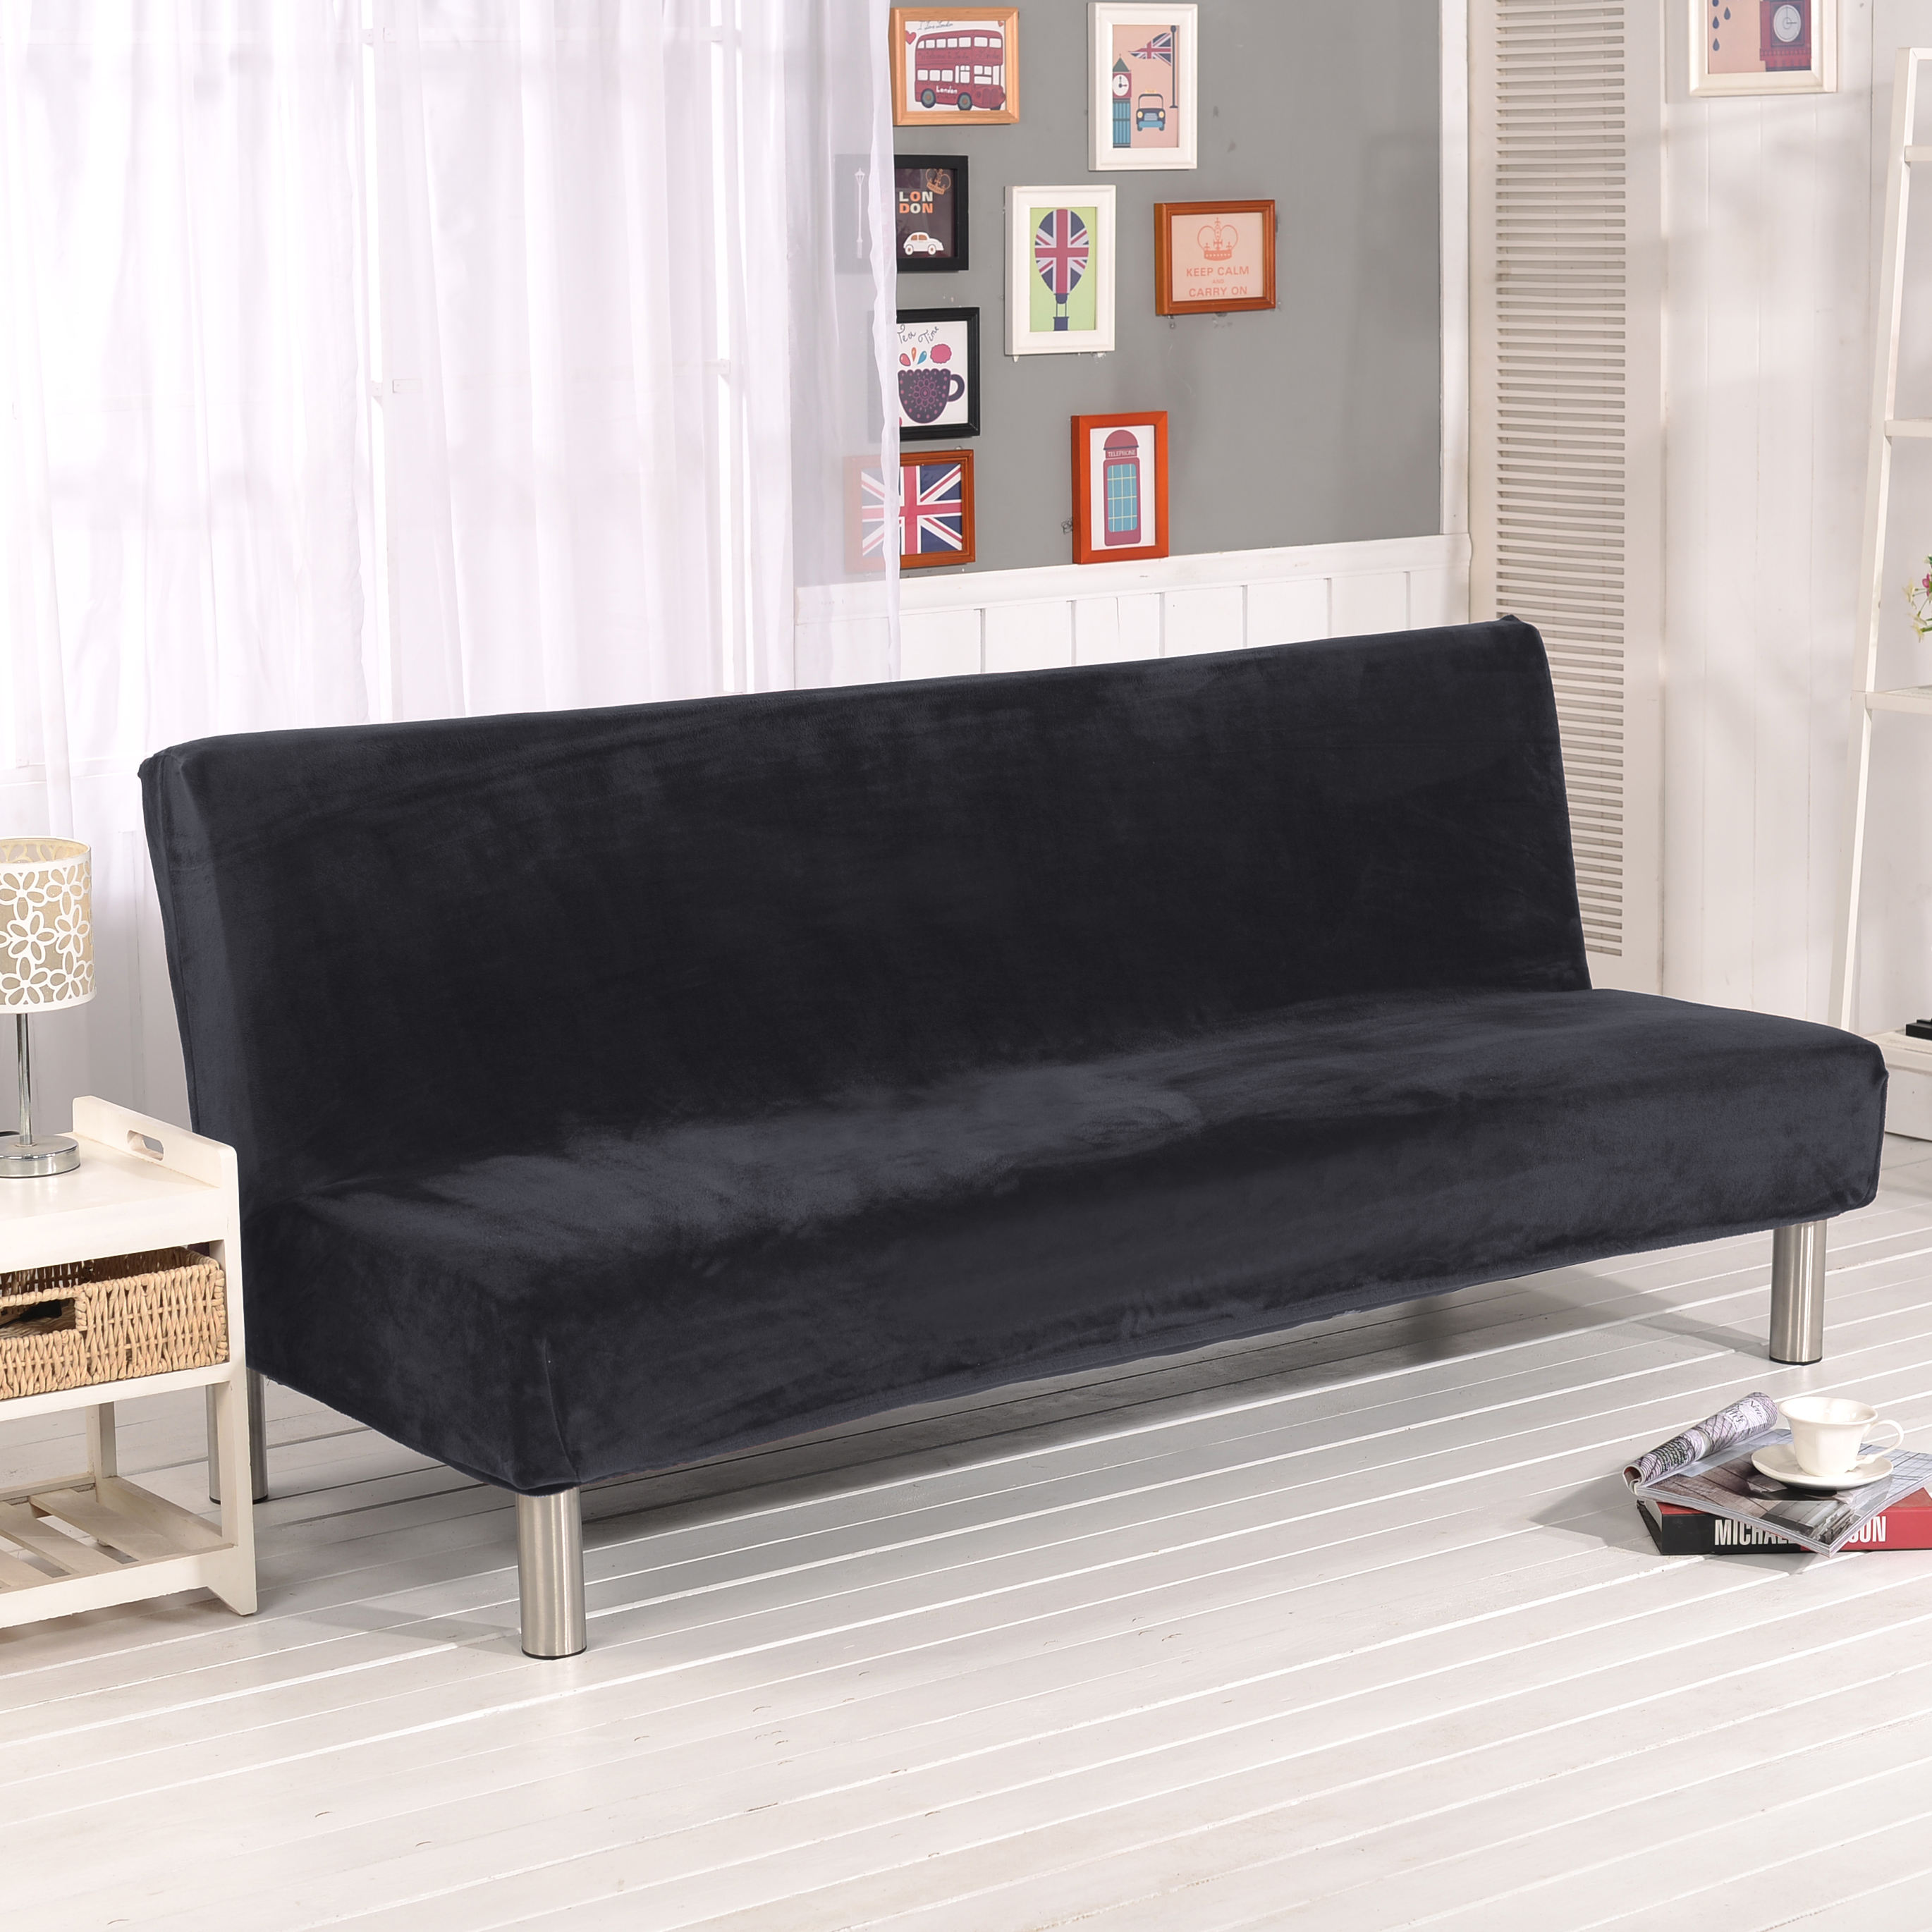 Soft-Stretchy-Silky-Thicken-Sofa-Cover-Elastic-Full-Cover-Without-Armrest-Folding-Sofa-Bed-Cover-Sof-1740236-5